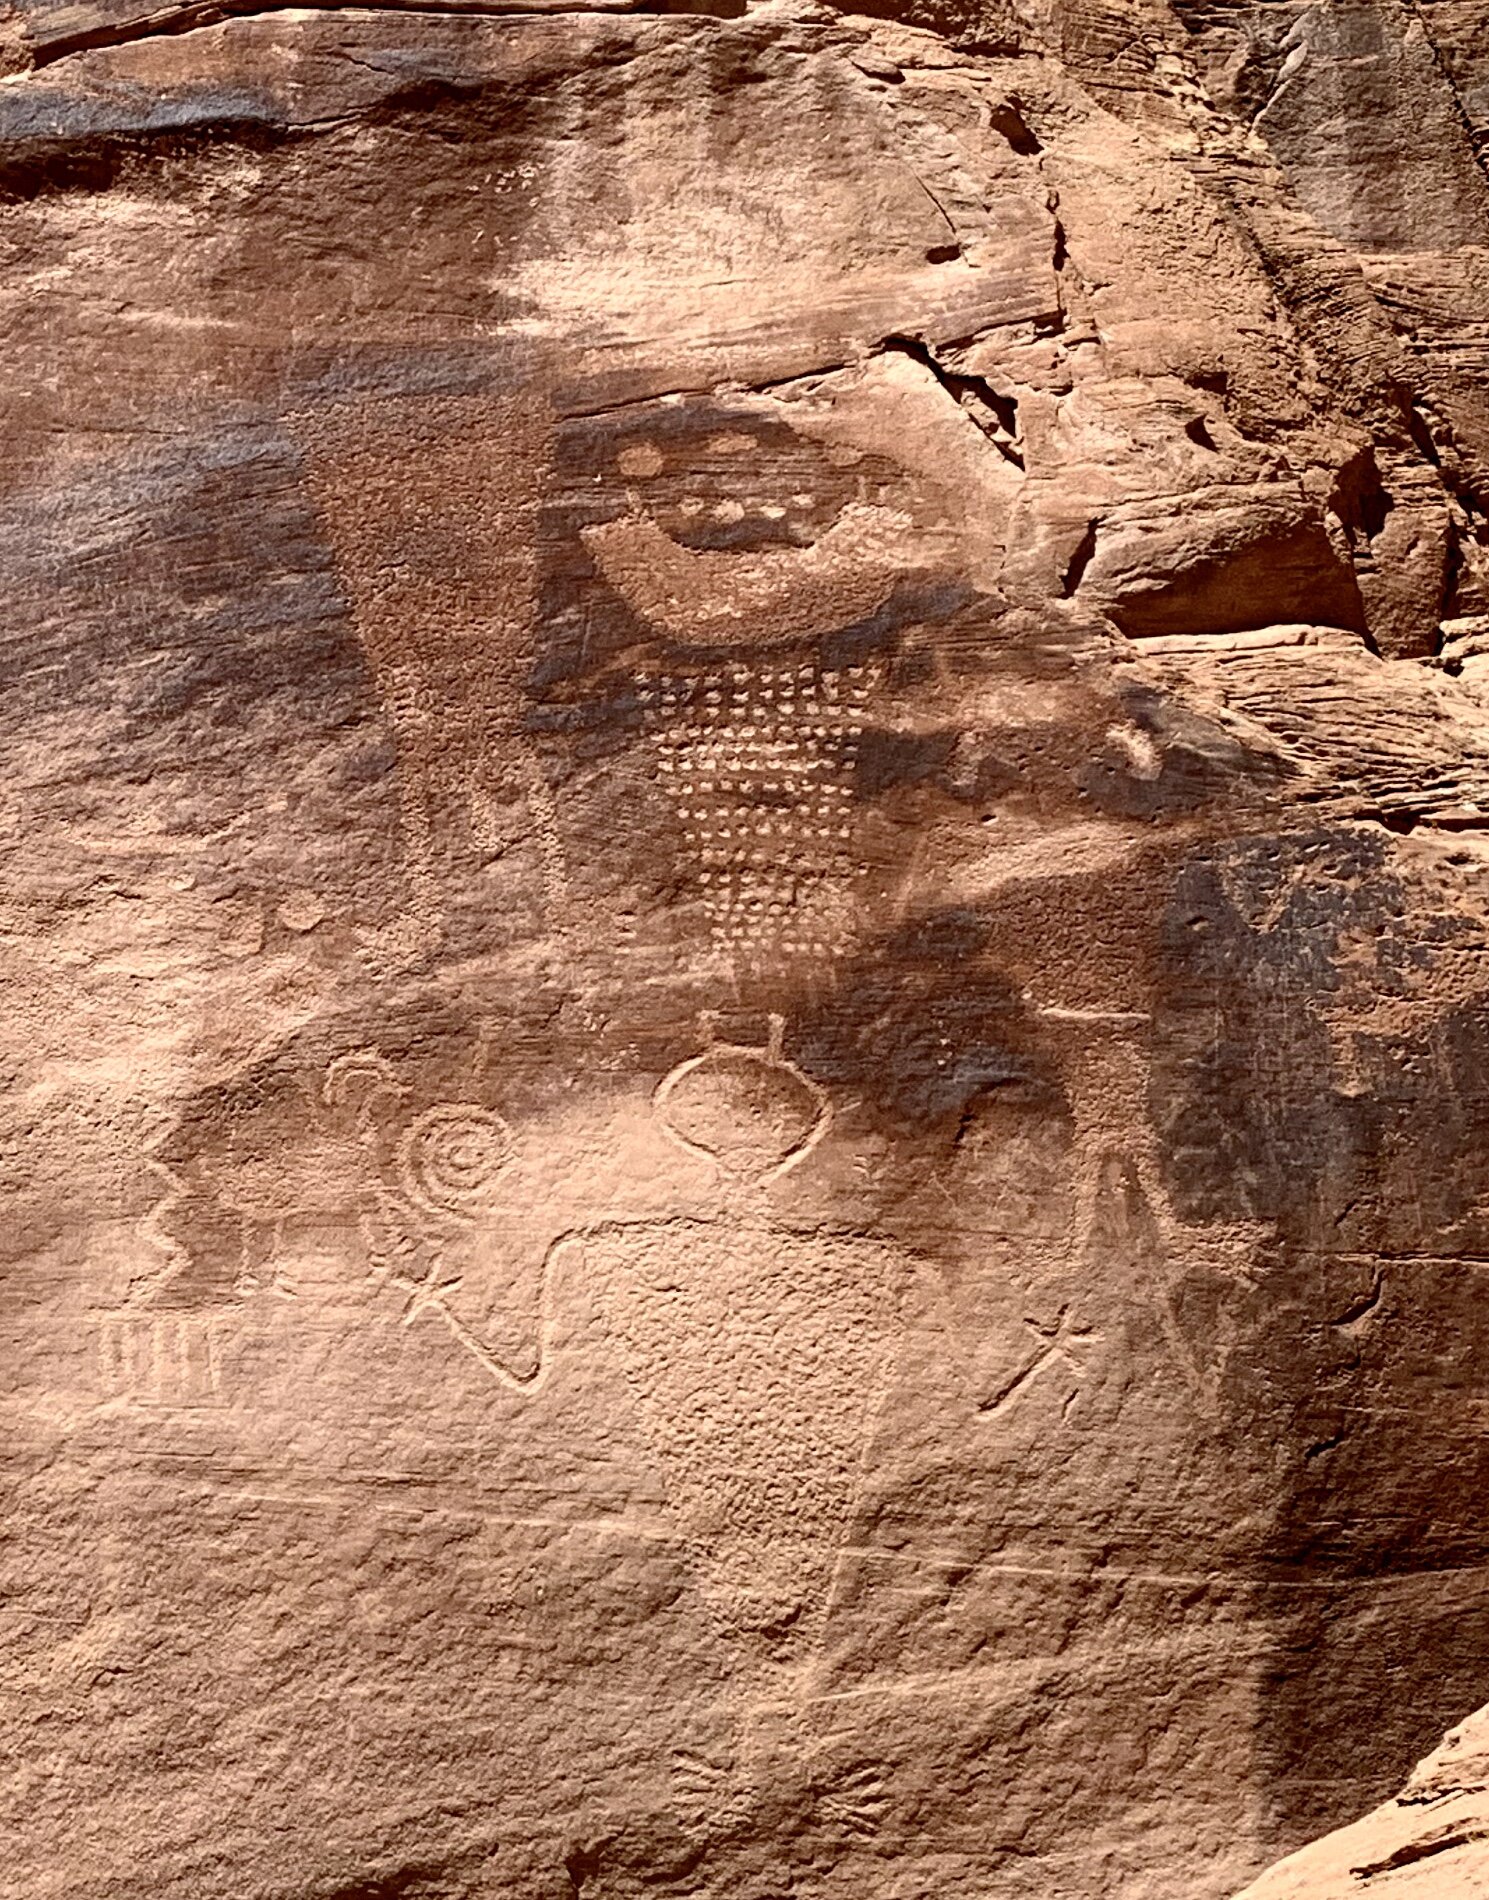  Over 1000 years ago, Dinosaur National Monument was home to the Freemont Indians. It is believed they are responsible for the petroglyphs here. We saw many carvings of men, sheep, goats, and other recognizable figures. In particular, this one stuck 